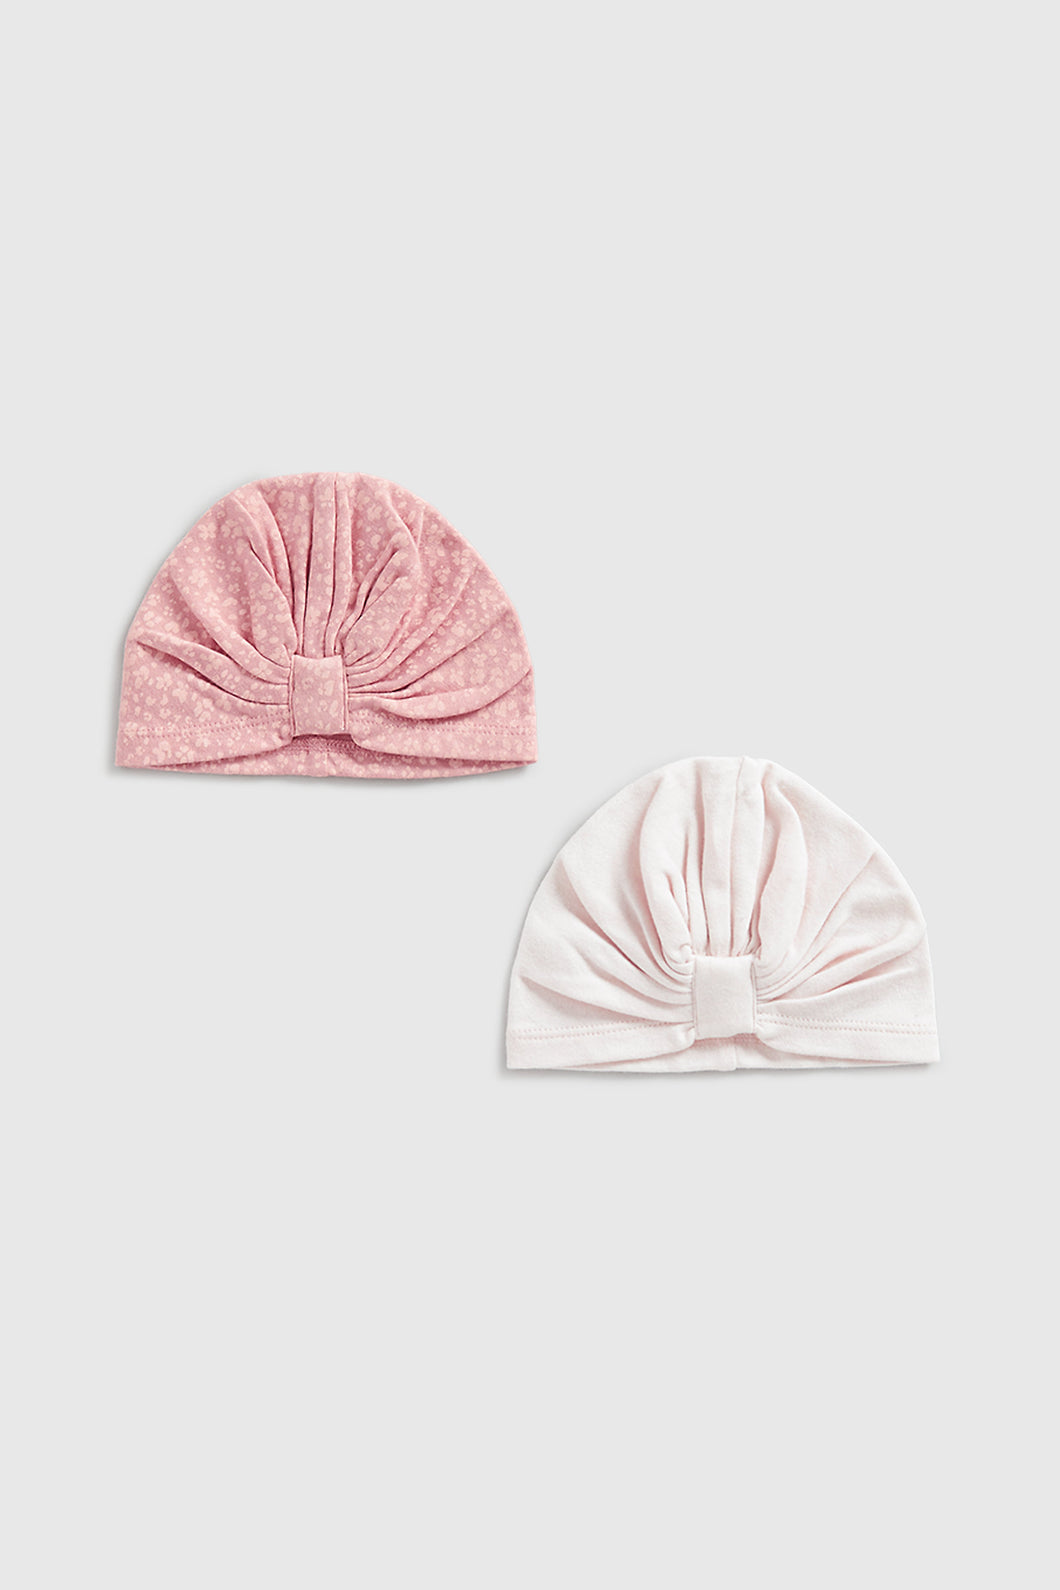 Mothercare Pink Baby Hats - 2 Pack